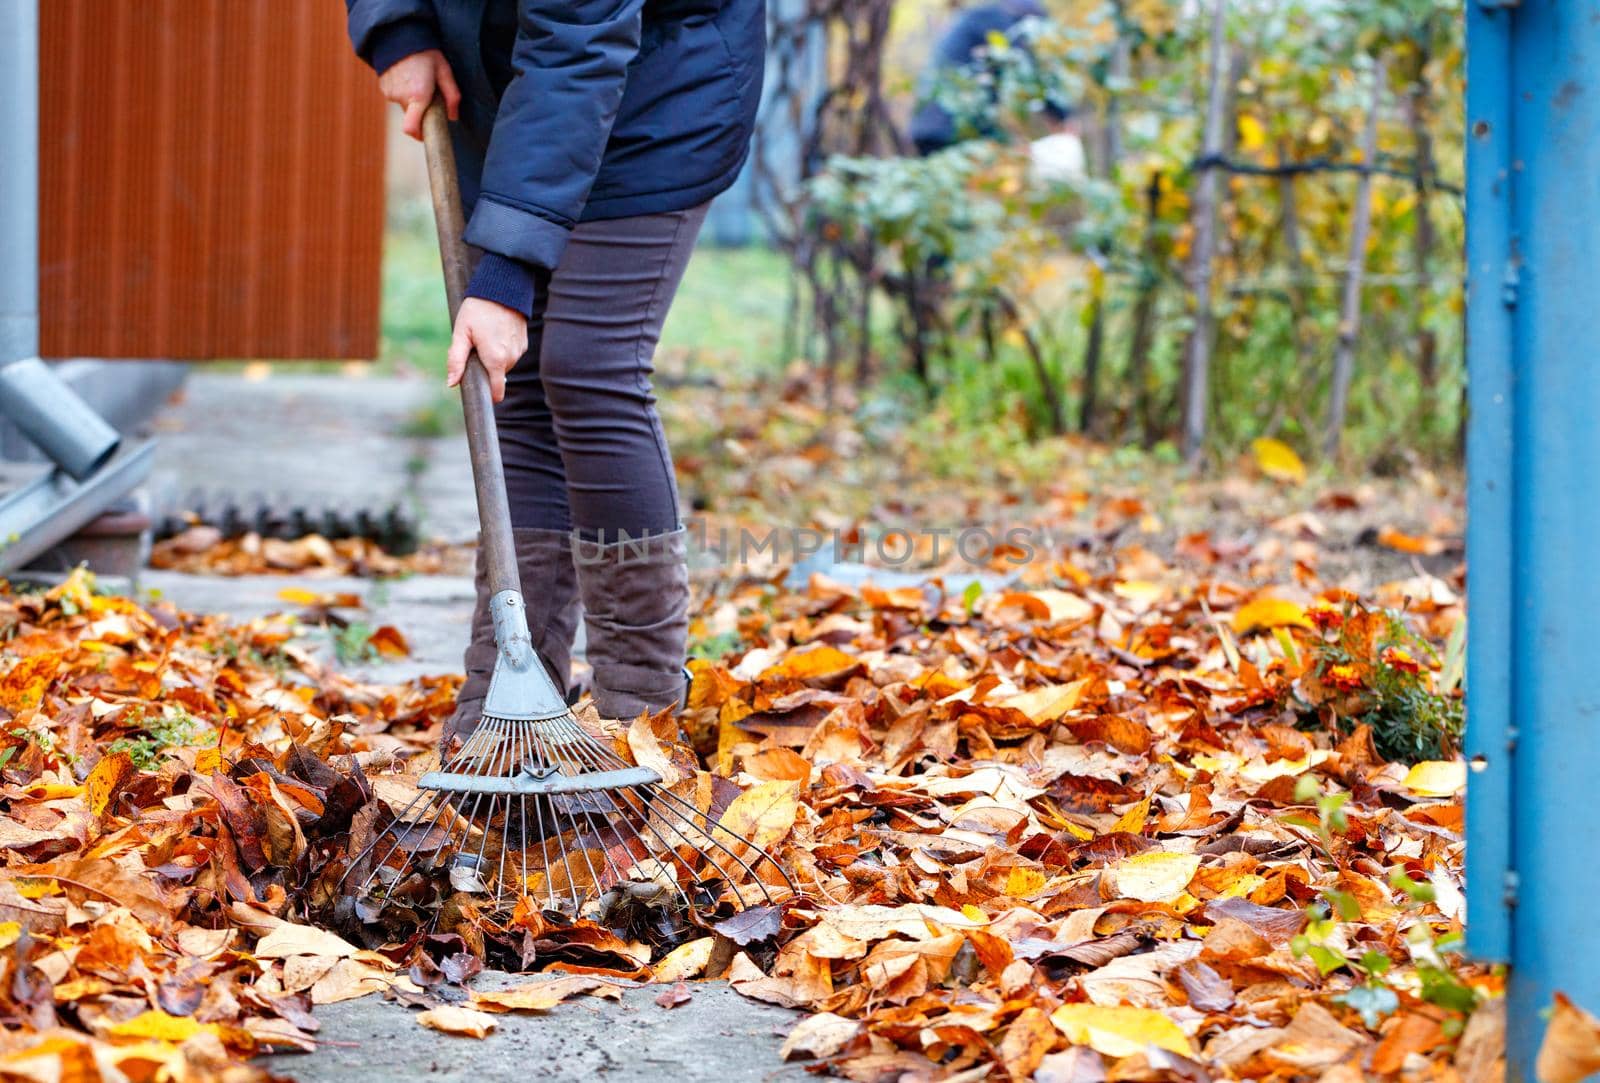 Orange, fallen cherry leaves in autumn in the autumn garden are raked with a metal rake from the path by the mistress of the house, shooting at the lowest point.